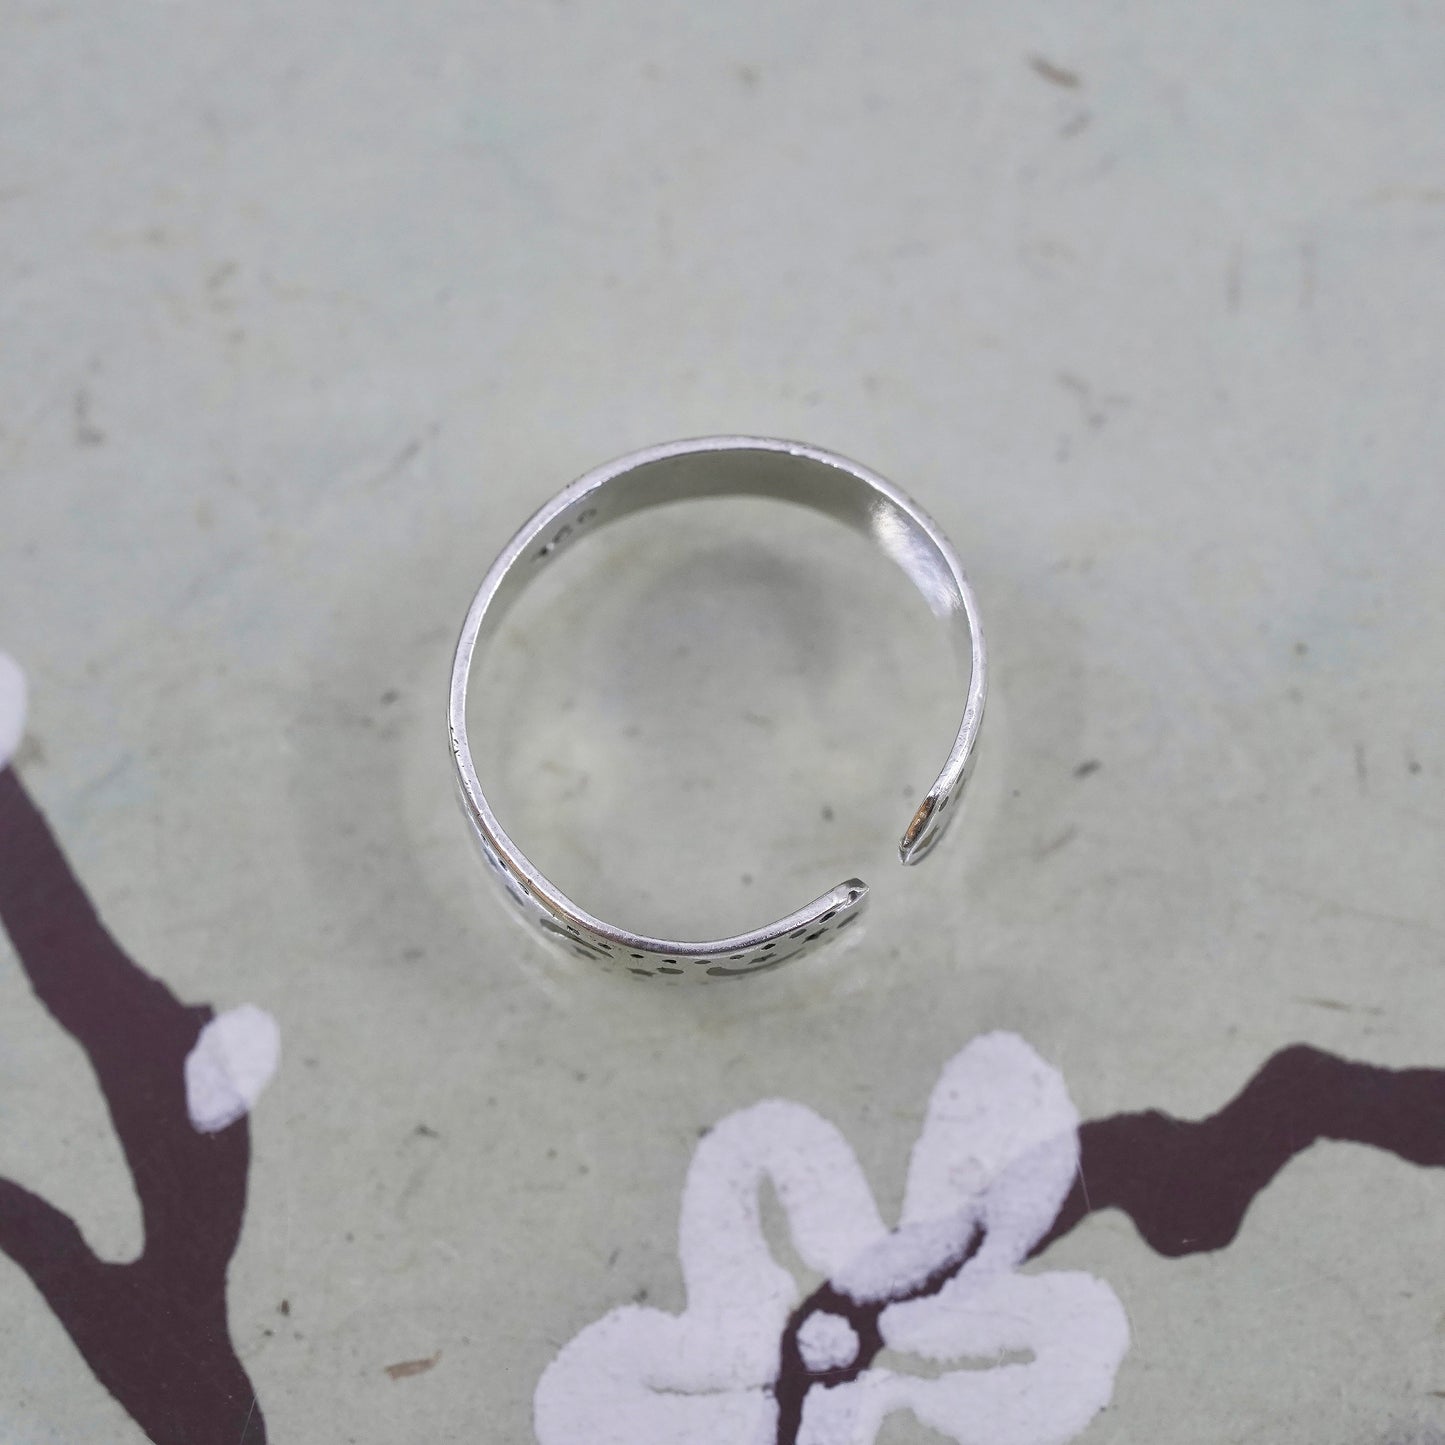 Size 4, Vintage sterling silver handmade ring, star moon 925 band with open end